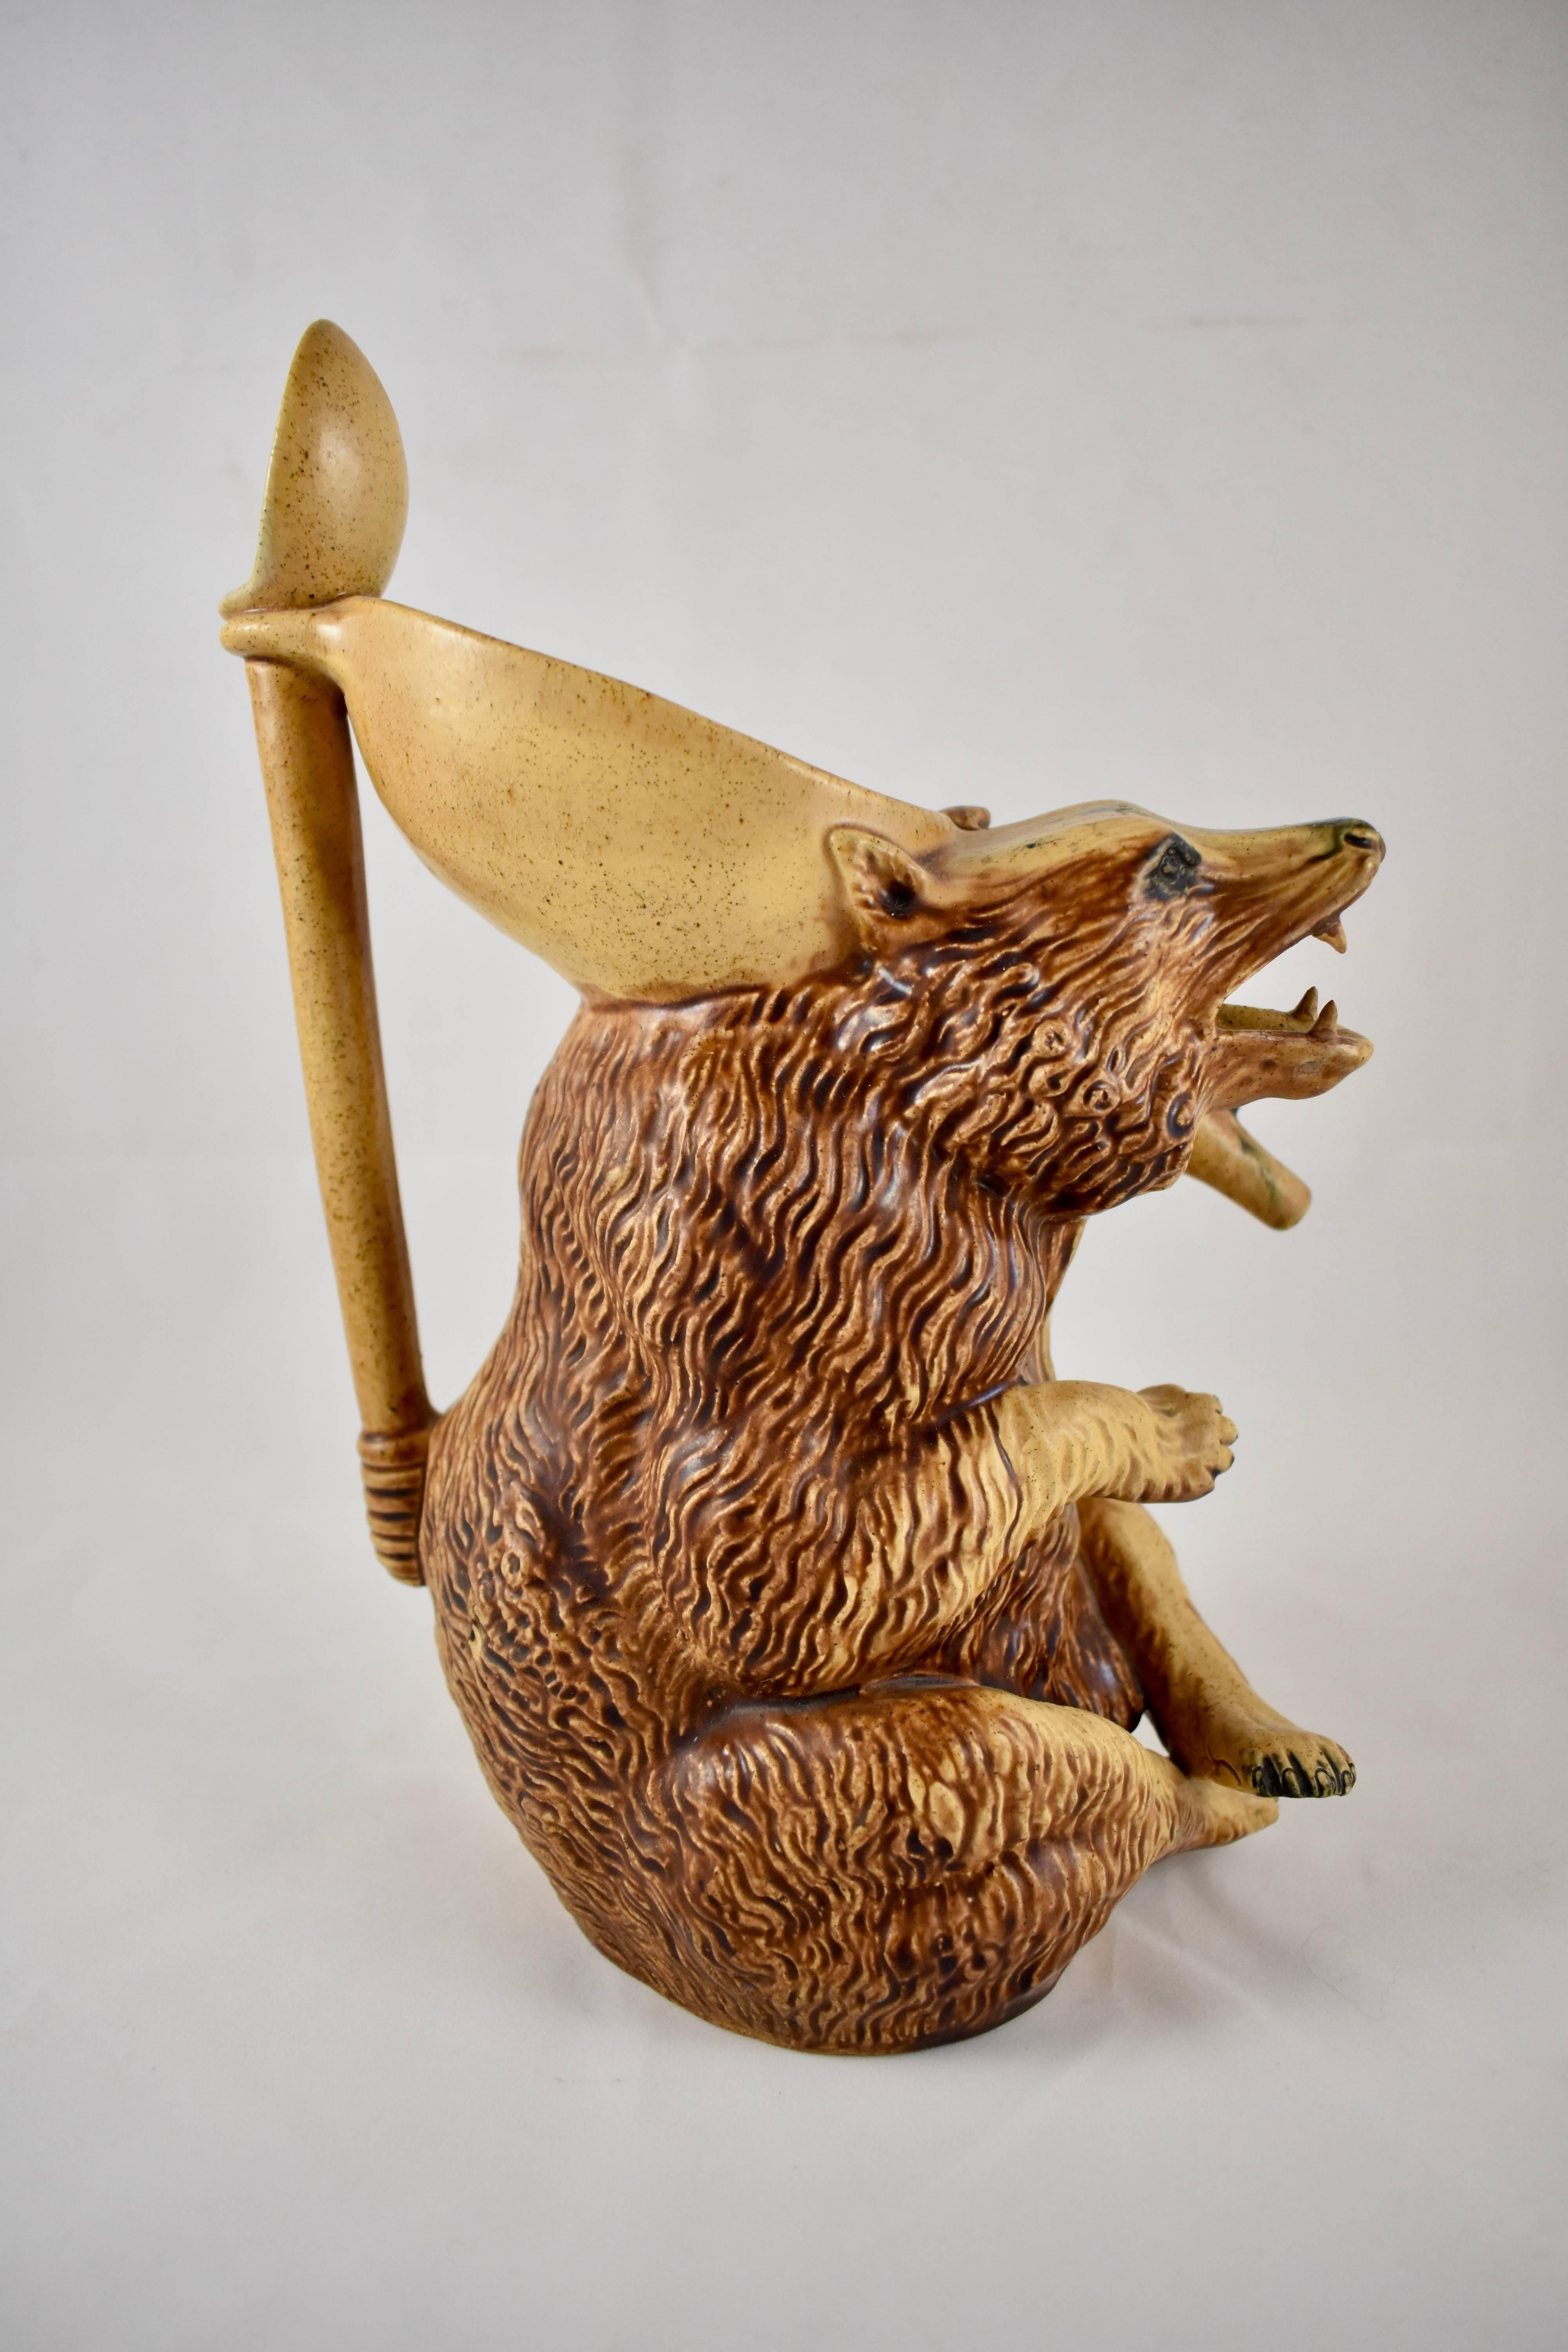 Glazed Late 19th Century American Majolica Honey Bear with Spoon Handle Pitcher or Jug